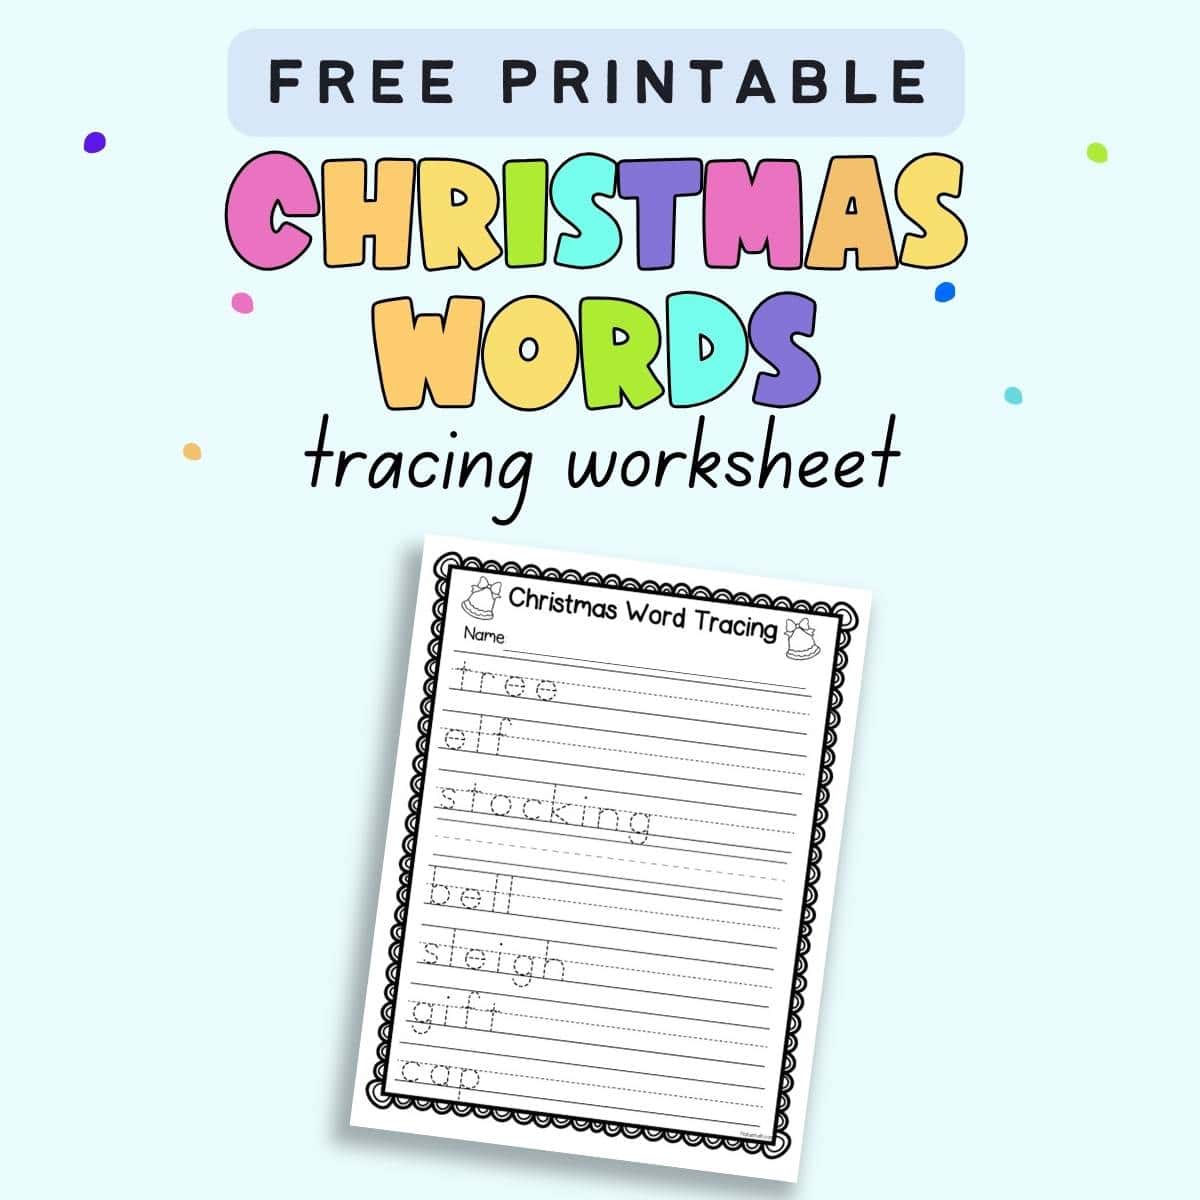 text "free printable Christmas words tracing worksheet" with a preview of a worksheet with seven words to trace